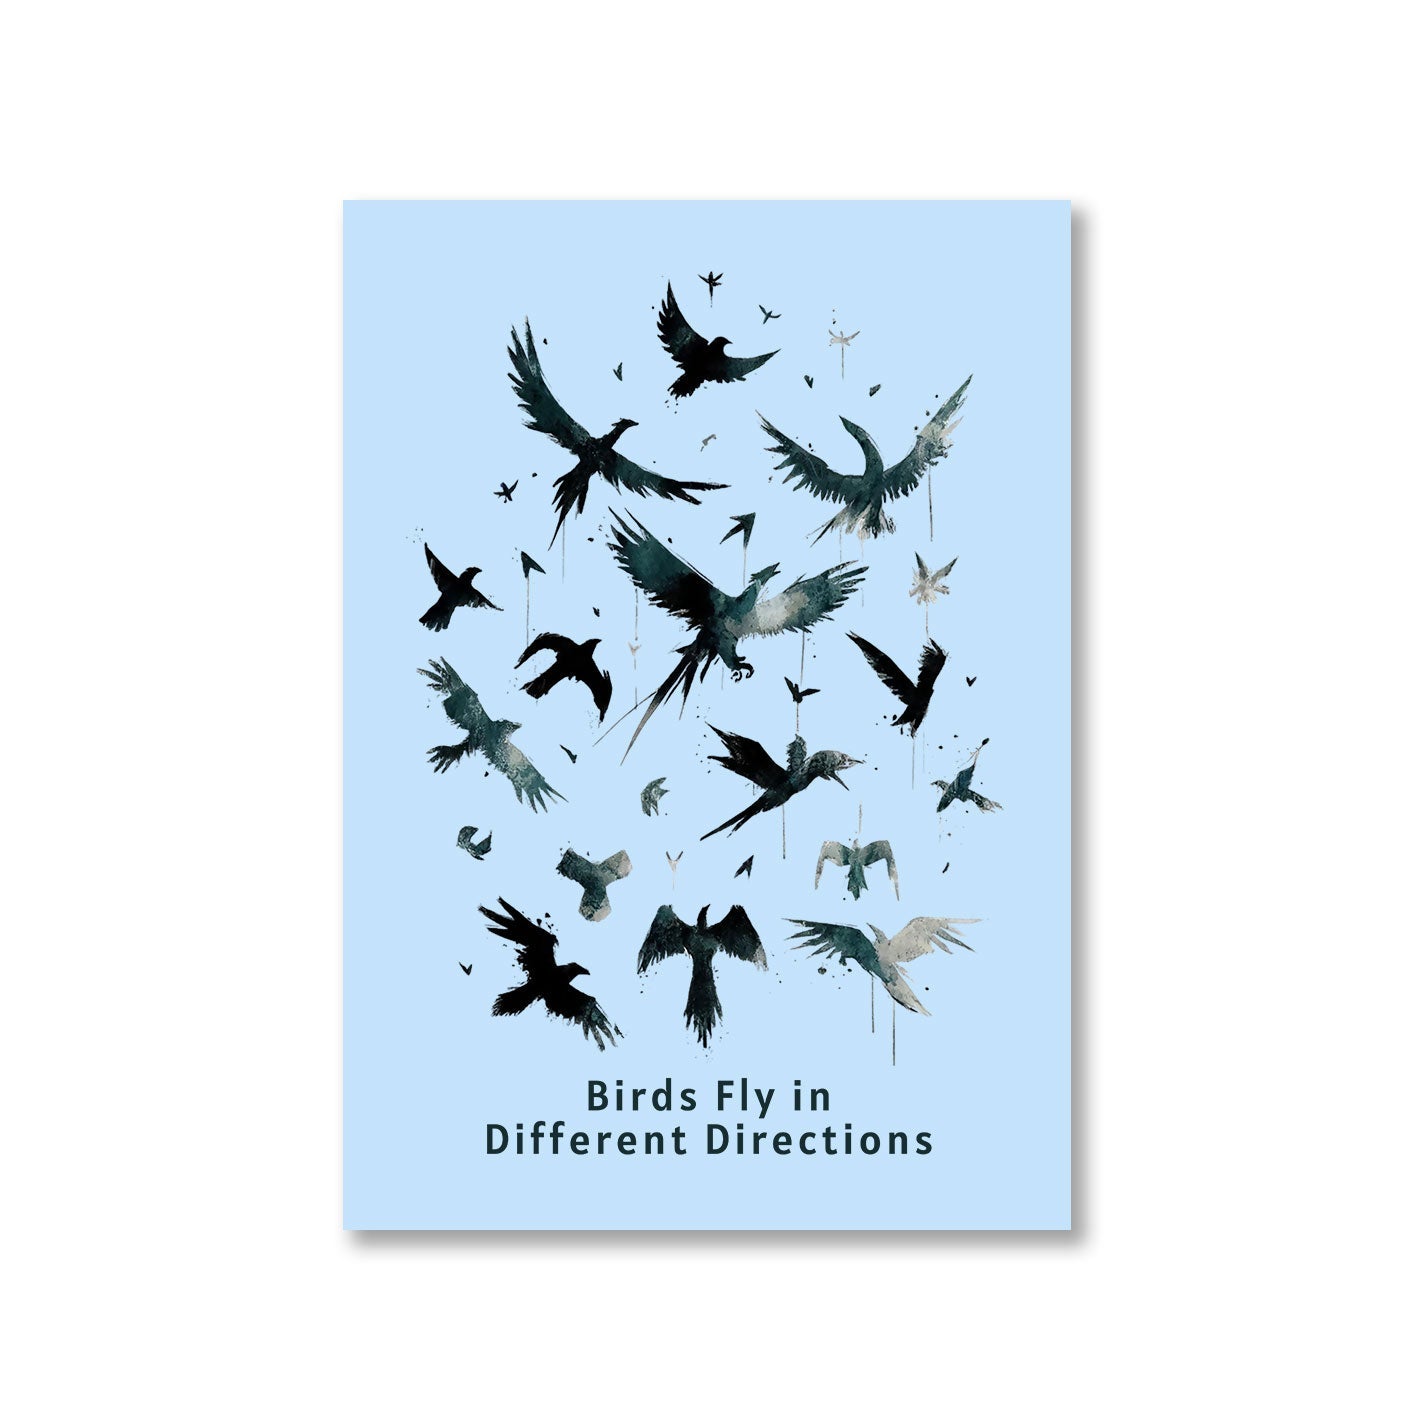 imagine dragons birds fly in different directions poster wall art buy online united states of america usa the banyan tee tbt a4 